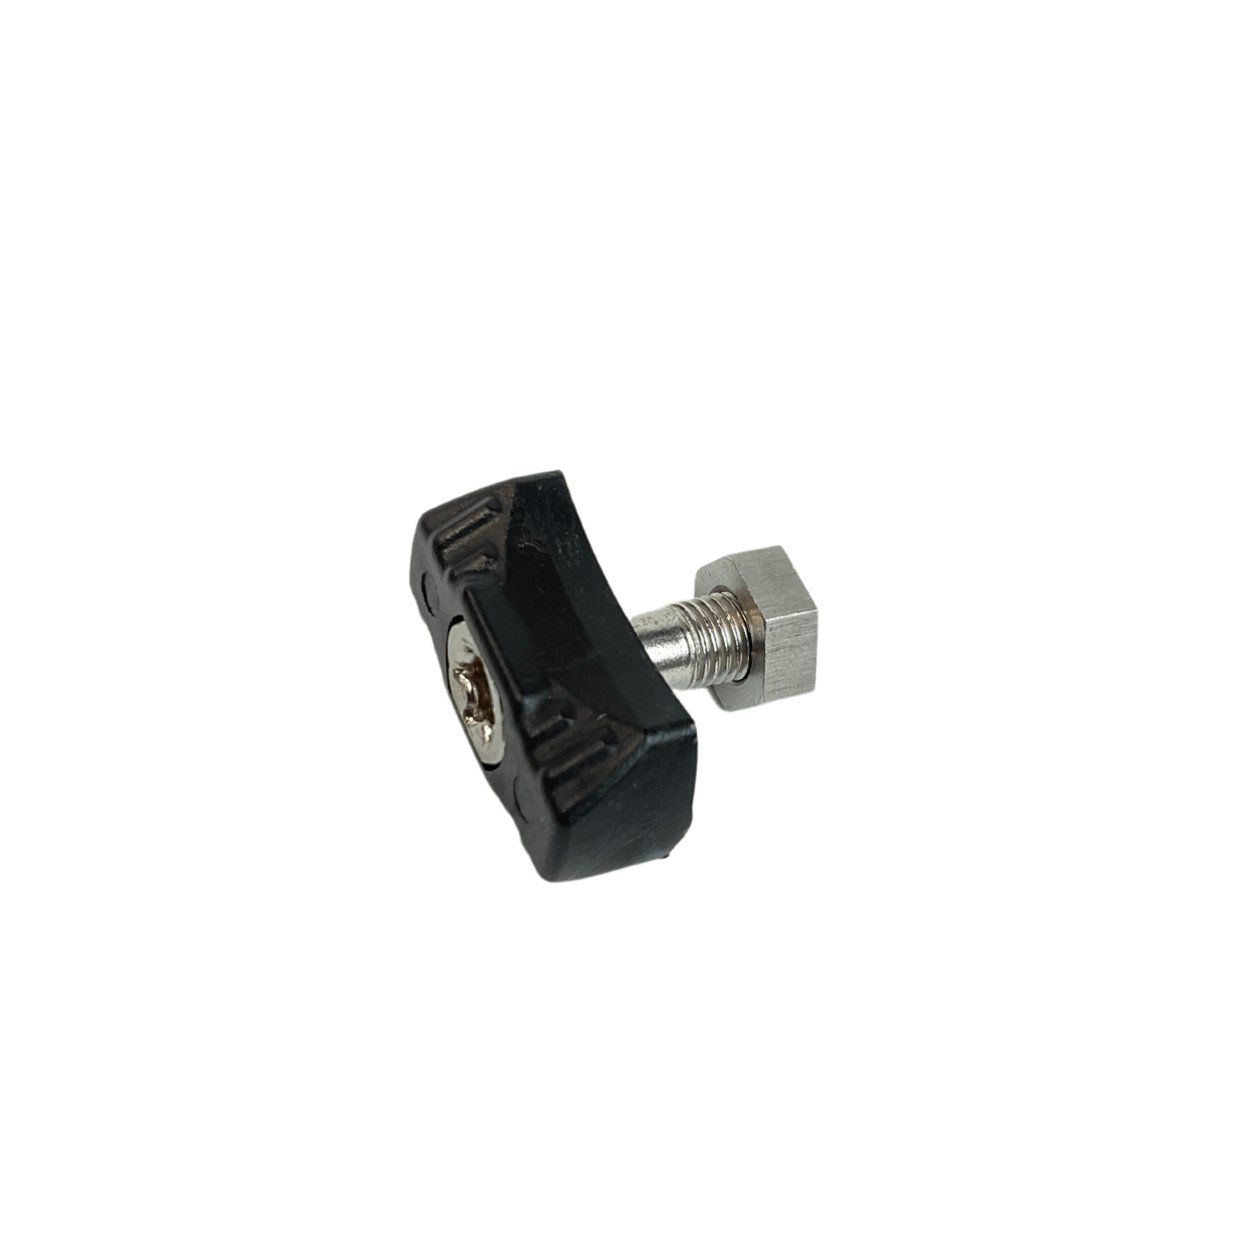 Duotone Screw Spare QM Mast (DUO) 2024 - Worthing Watersports - 9010583196978 - DT Spareparts - Duotone X